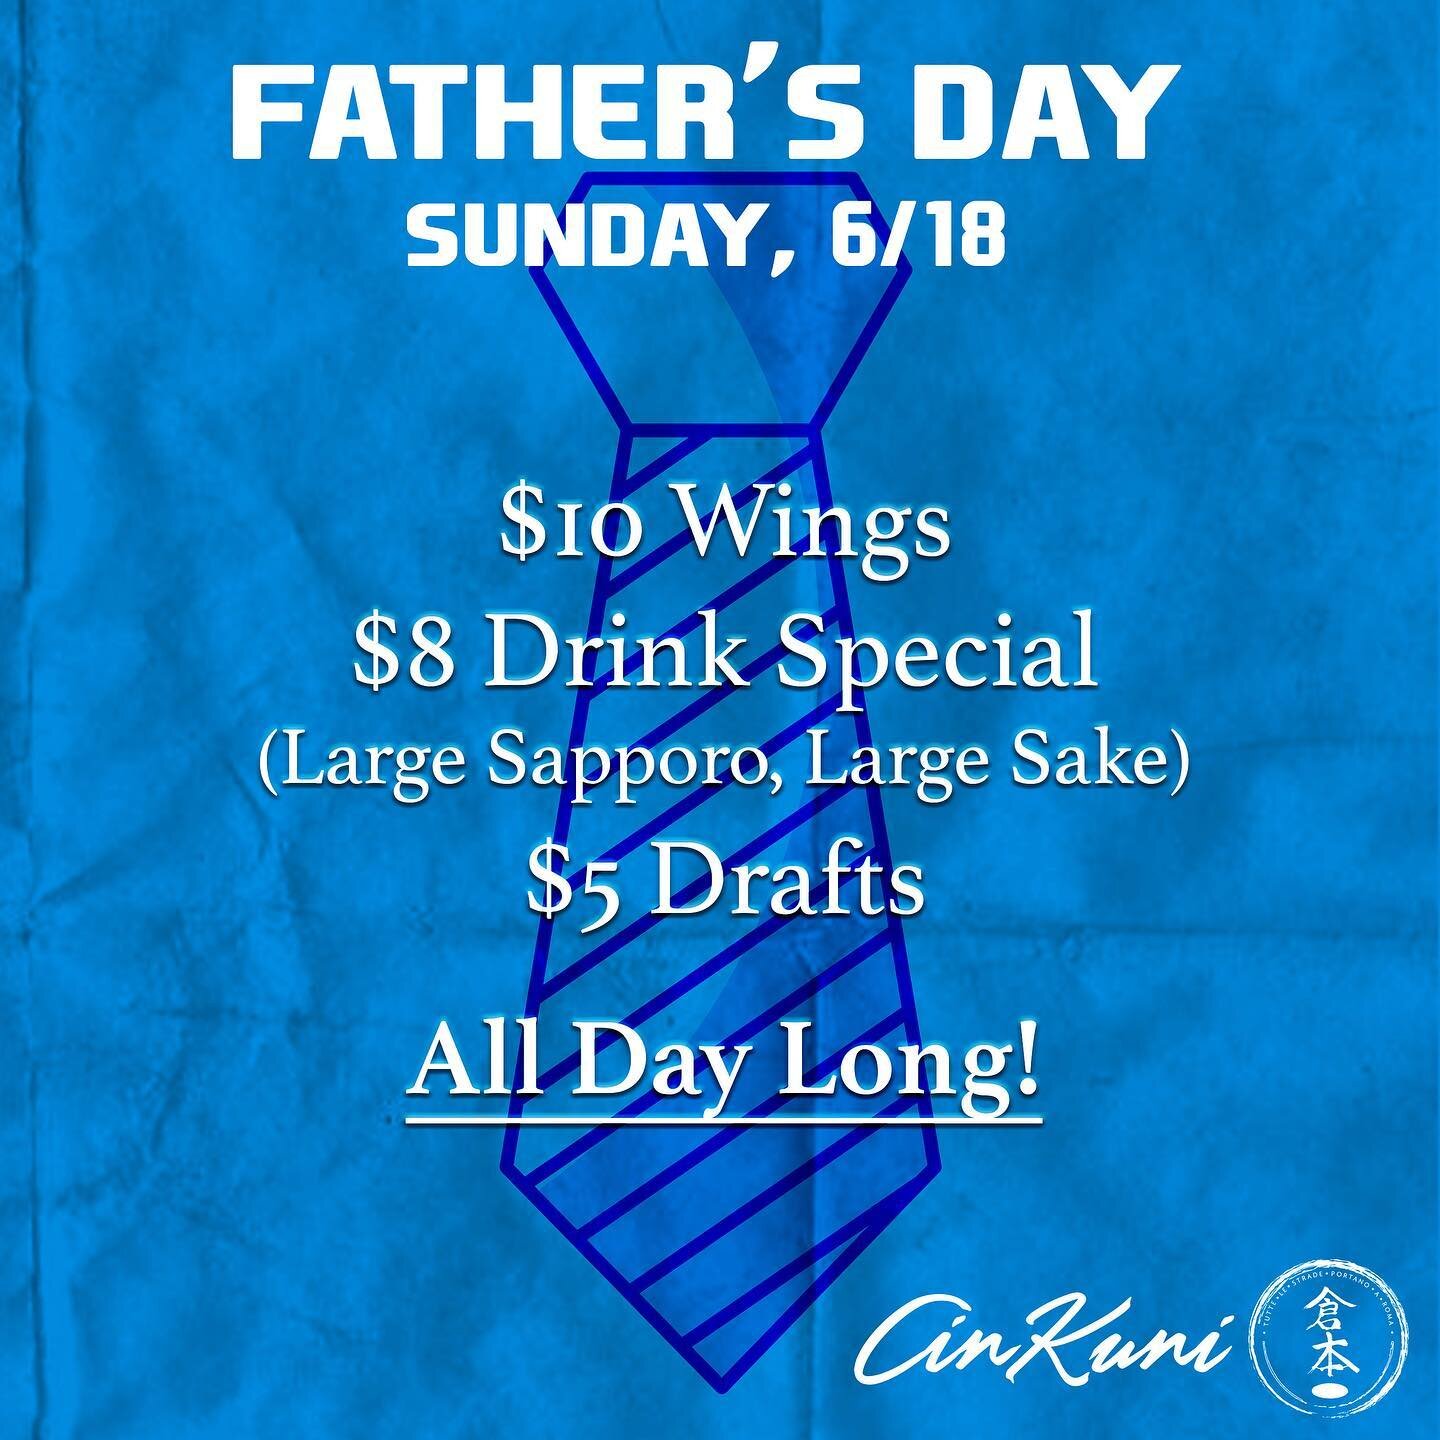 We&rsquo;ve got these promotions running for you all Sunday long (just bring your dad)! 

Click the link in our bio to make a reservation 👔🍺🍶🍗
.
.
.
#fathersday #dadsday #dad #sundayvibes #sundayfunday #craftbeer #hotsake #sakebomb #chickenwings 